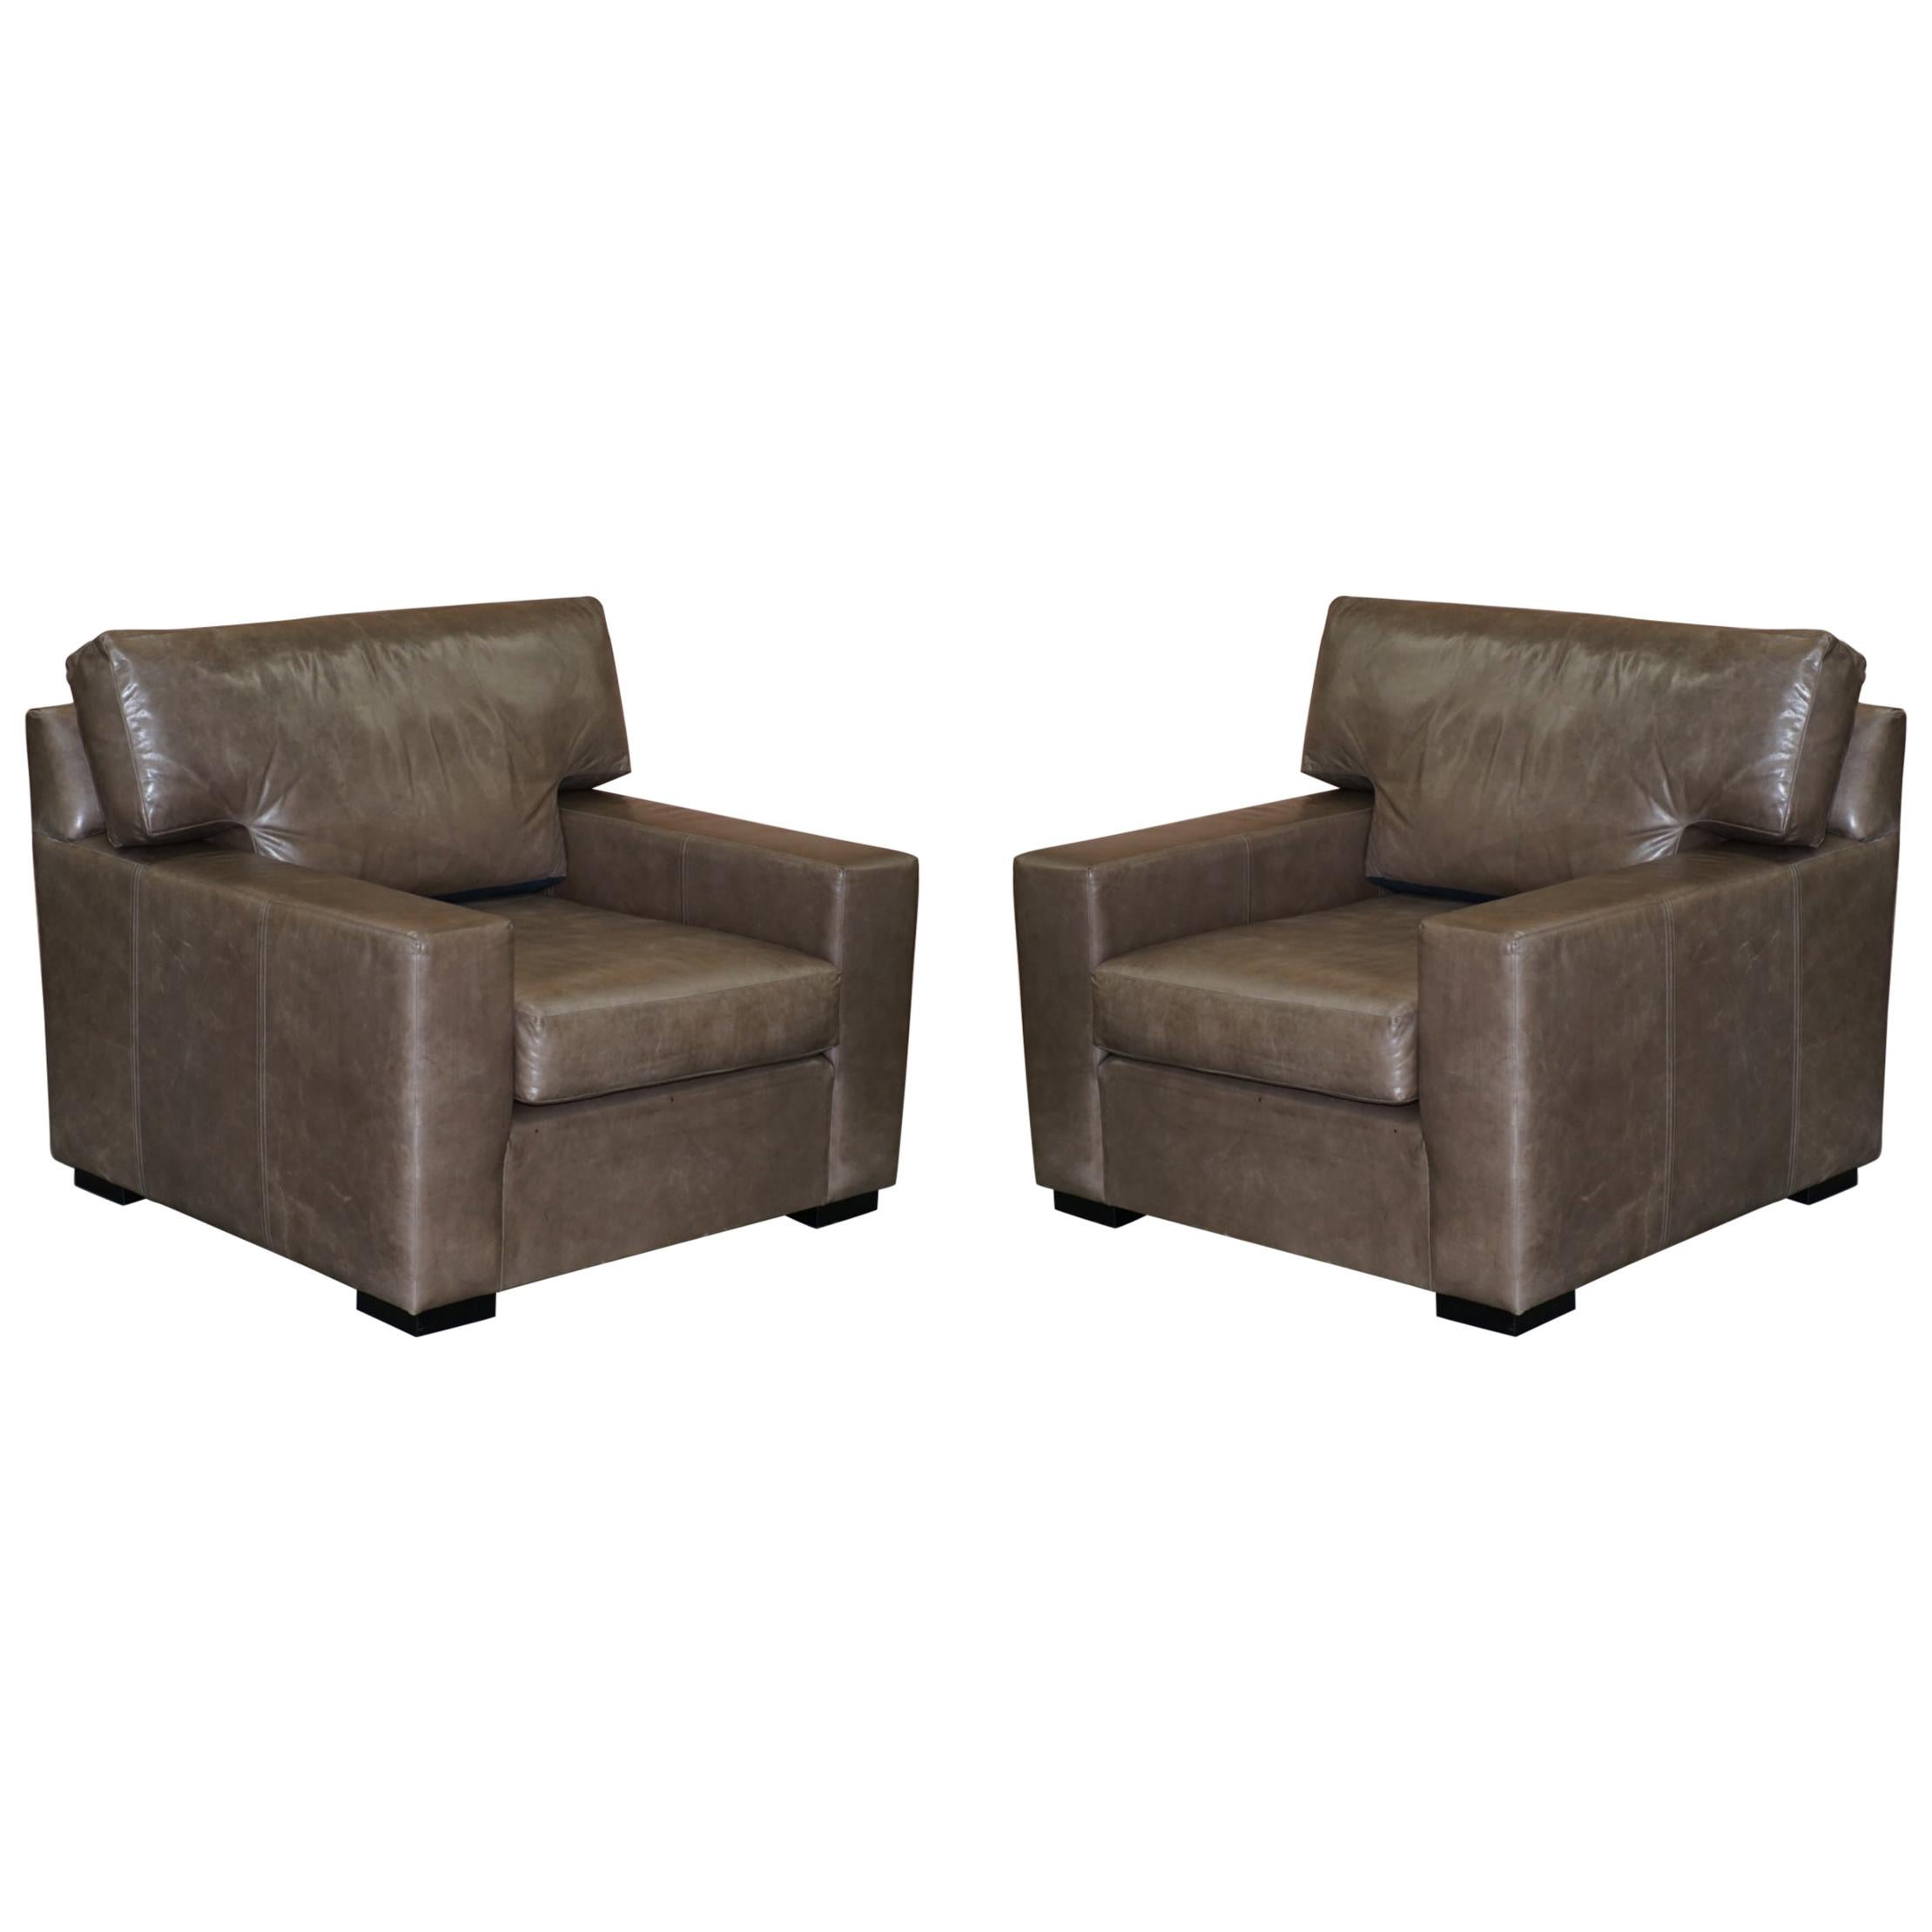 Luxury Pair of Very Large Designer Grey Leather Armchairs or Love Seats